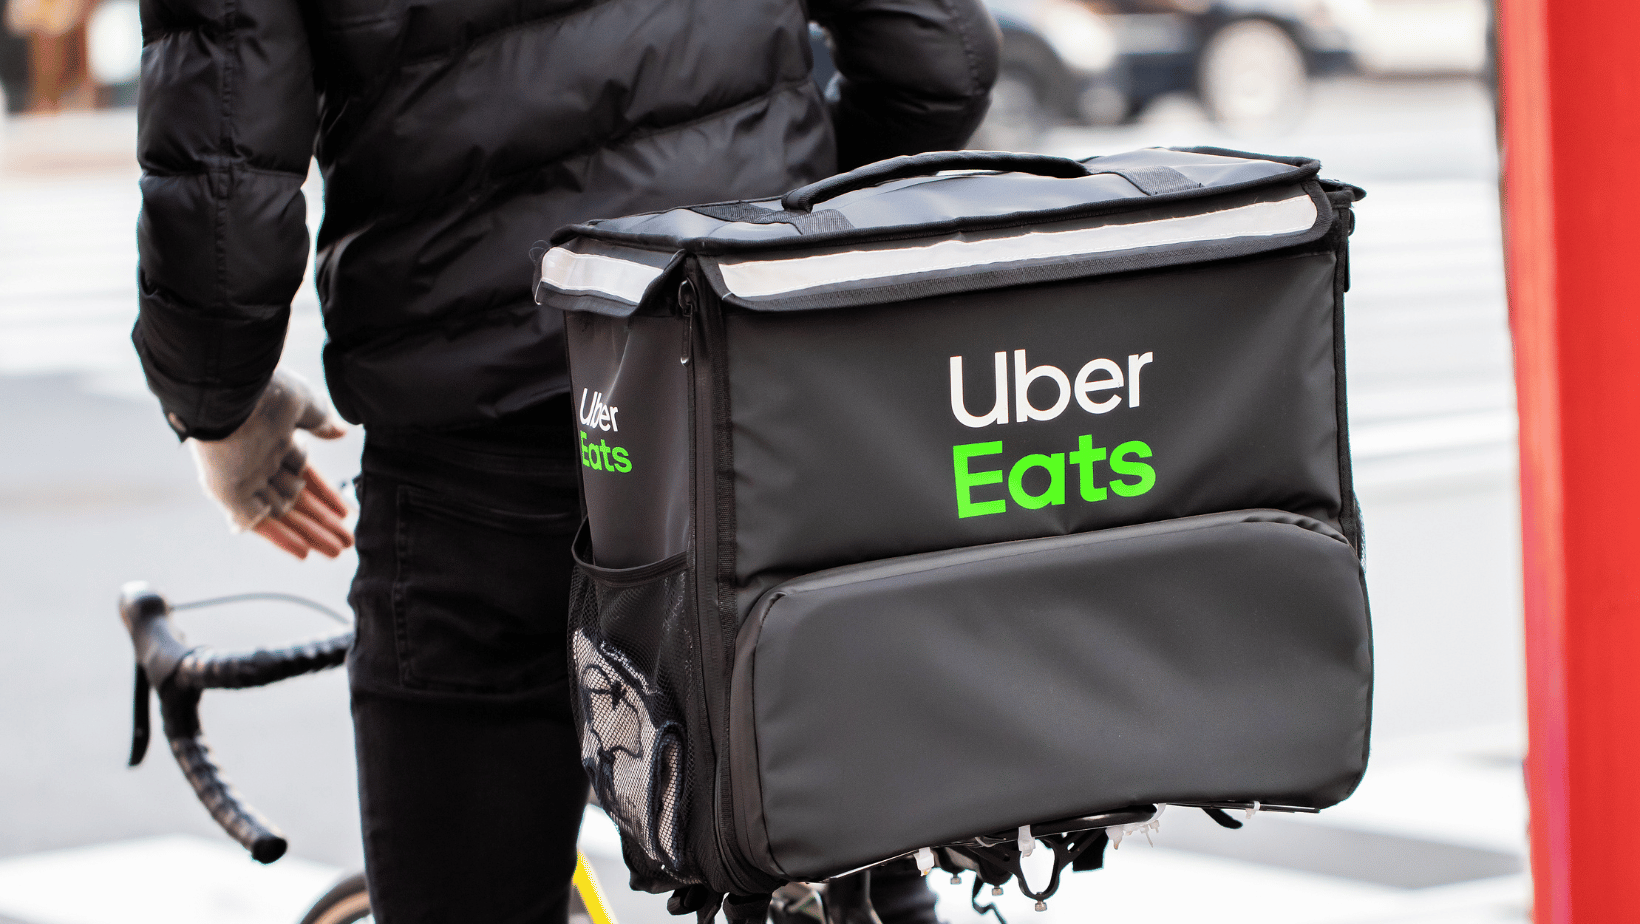 UberEats courier delivering by bicycle.